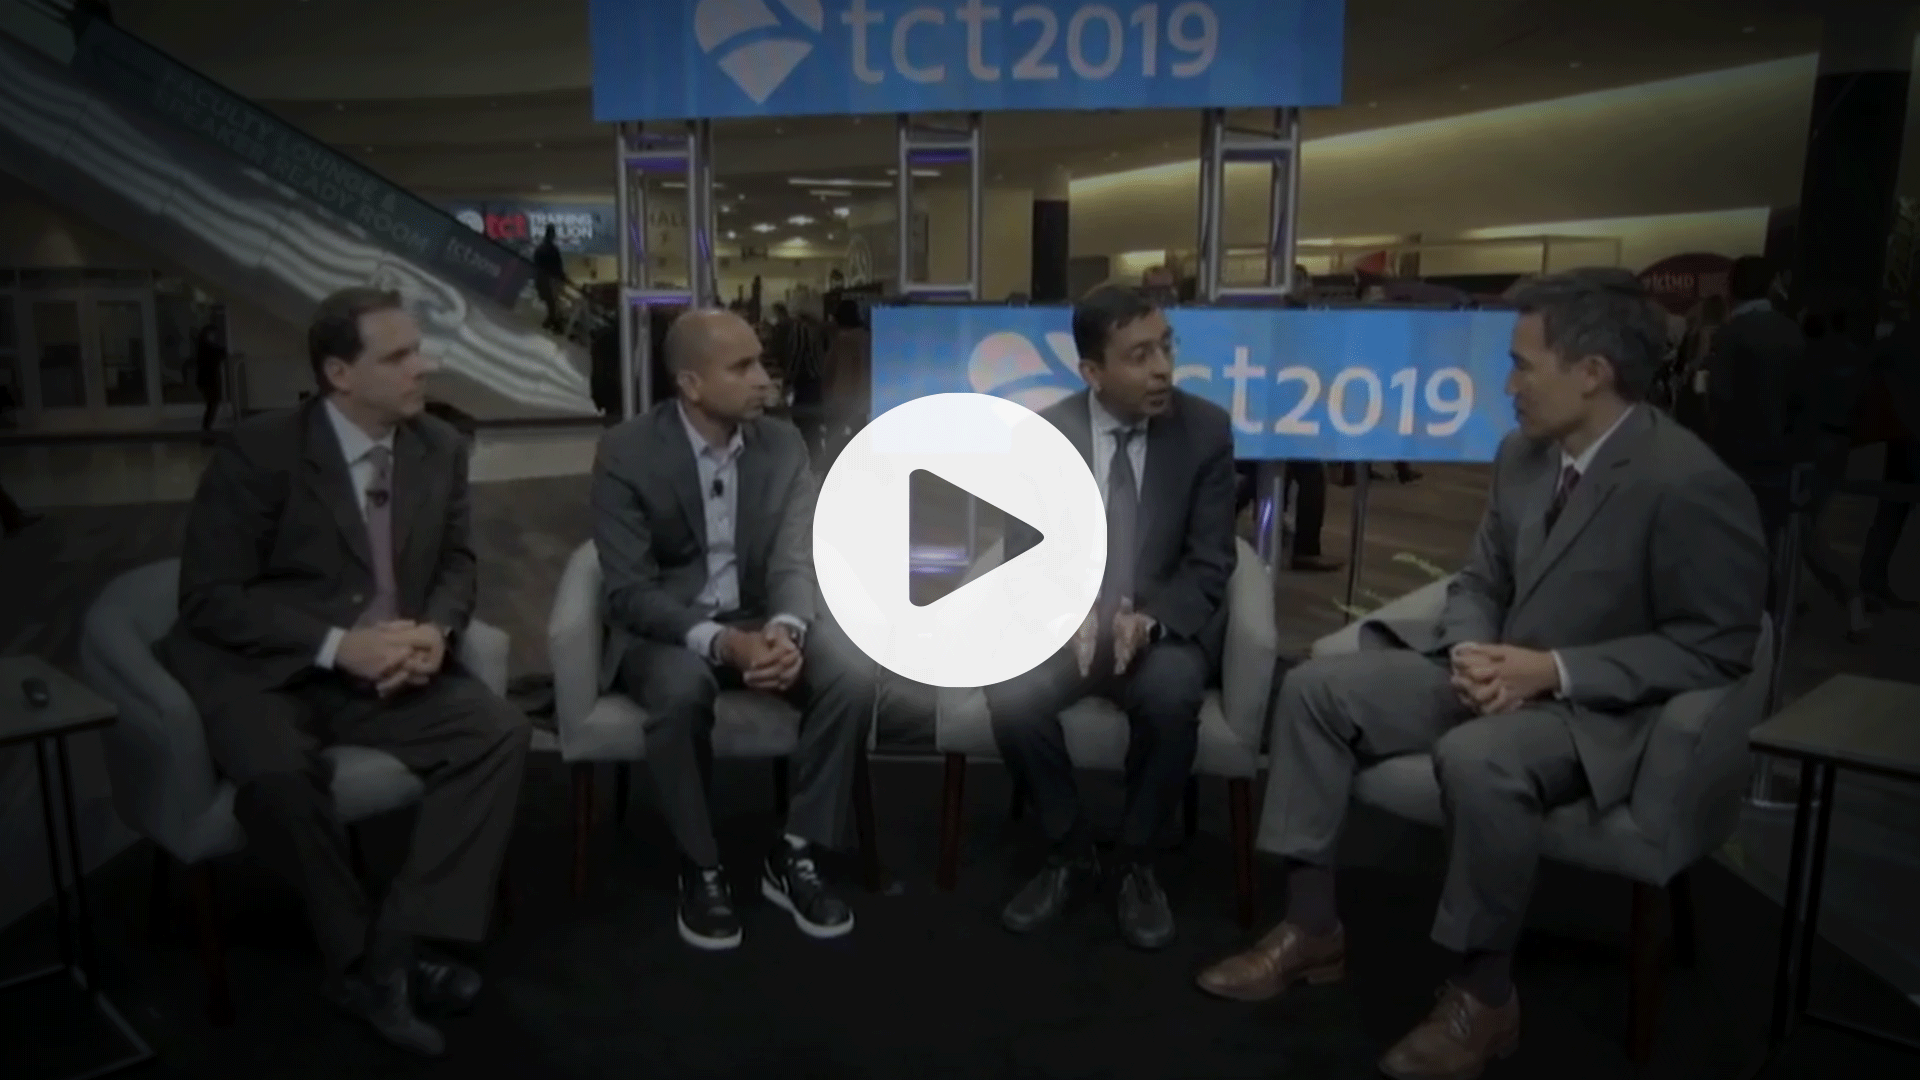 Hear more from Dr. Aloke Finn talking to Dr. Robert Yeh at TCT 2019 